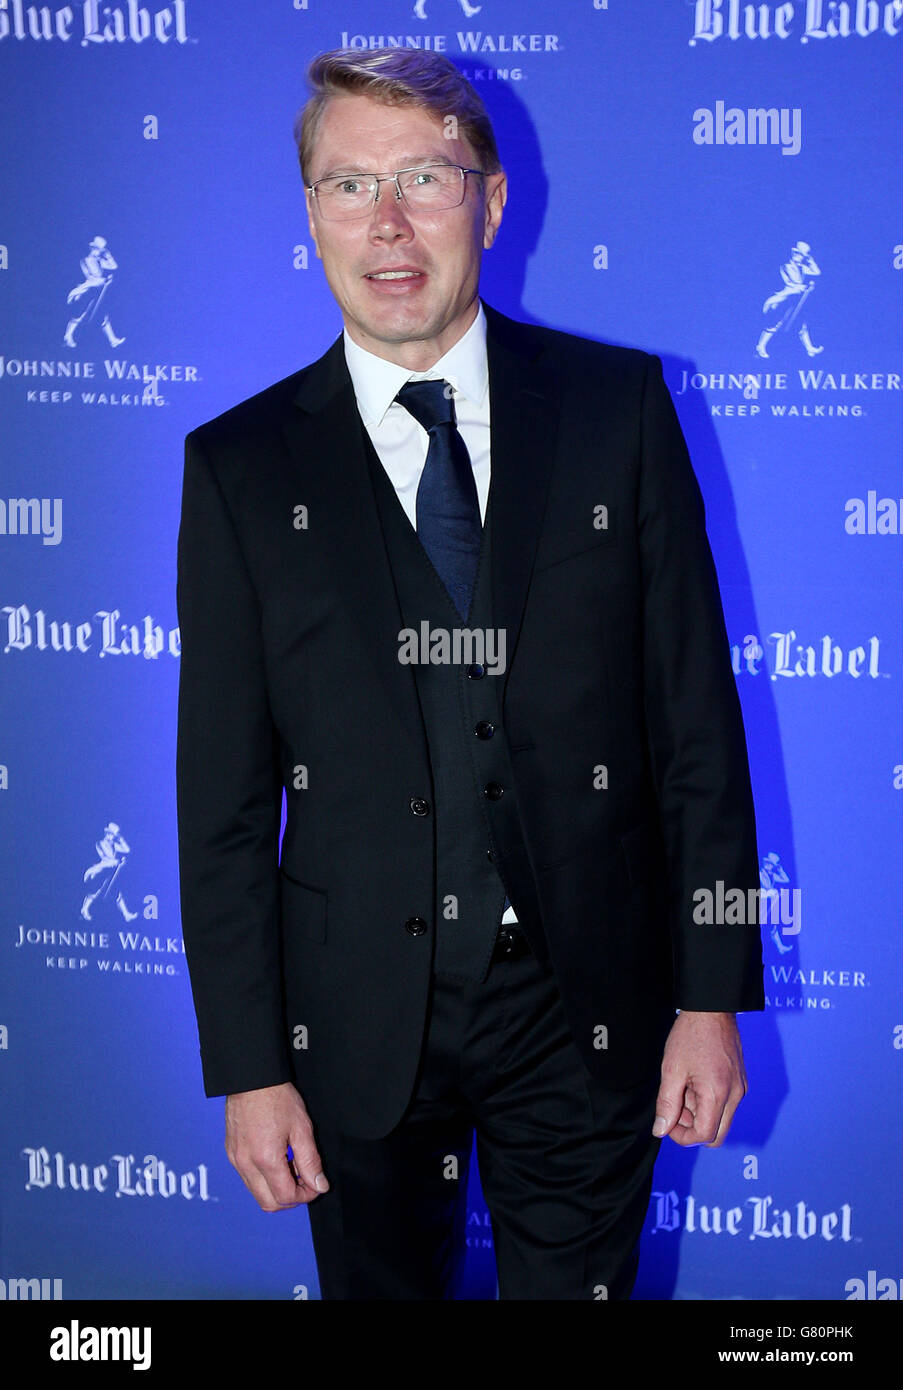 Two-time World Champion and Johnnie Walker Responsible Drinking Ambassador Mika Hakkinen arrives at Symphony in Blue, hosted by Johnnie Walker Blue Label, in Monaco. Stock Photo